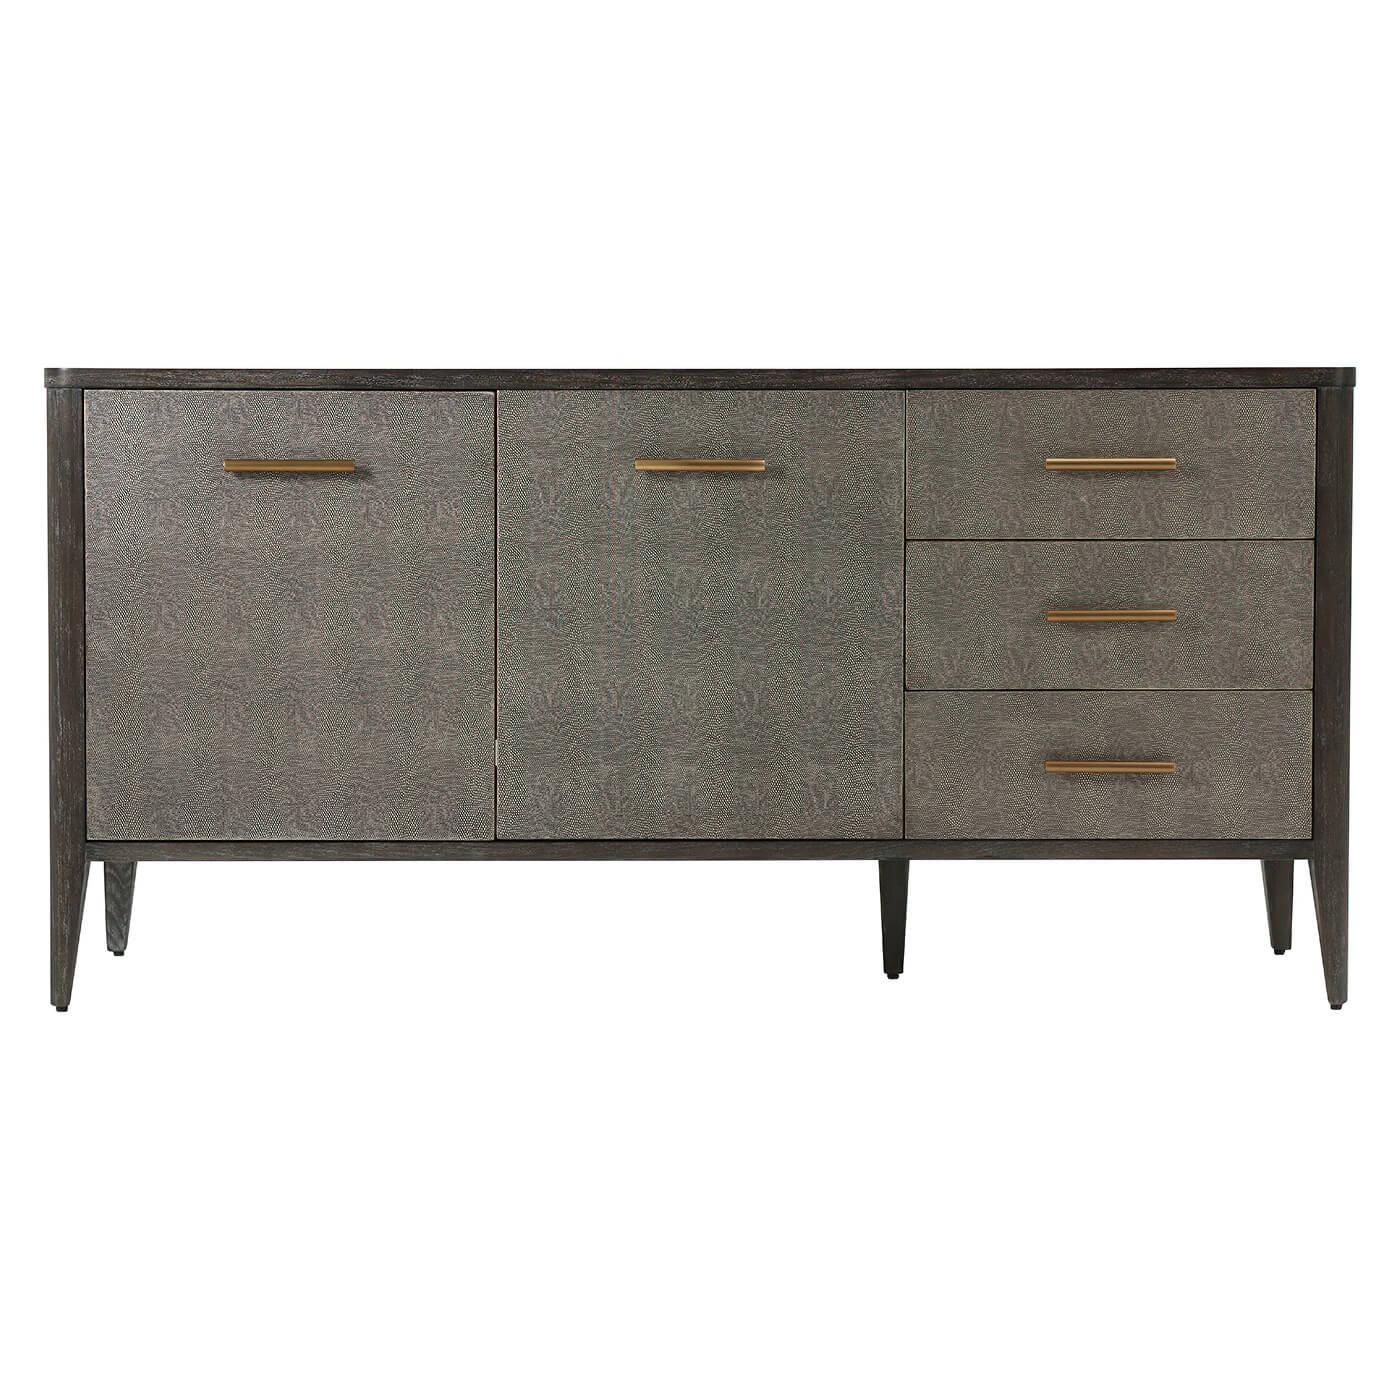 Midcentury style dark tempest embossed leather wrapped sideboard with rowan finish primavera veneer and beech with three drawers beside a two-door cabinet enclosing adjustable shelved and with brushed brass finish handles.

Dimensions: 66.5